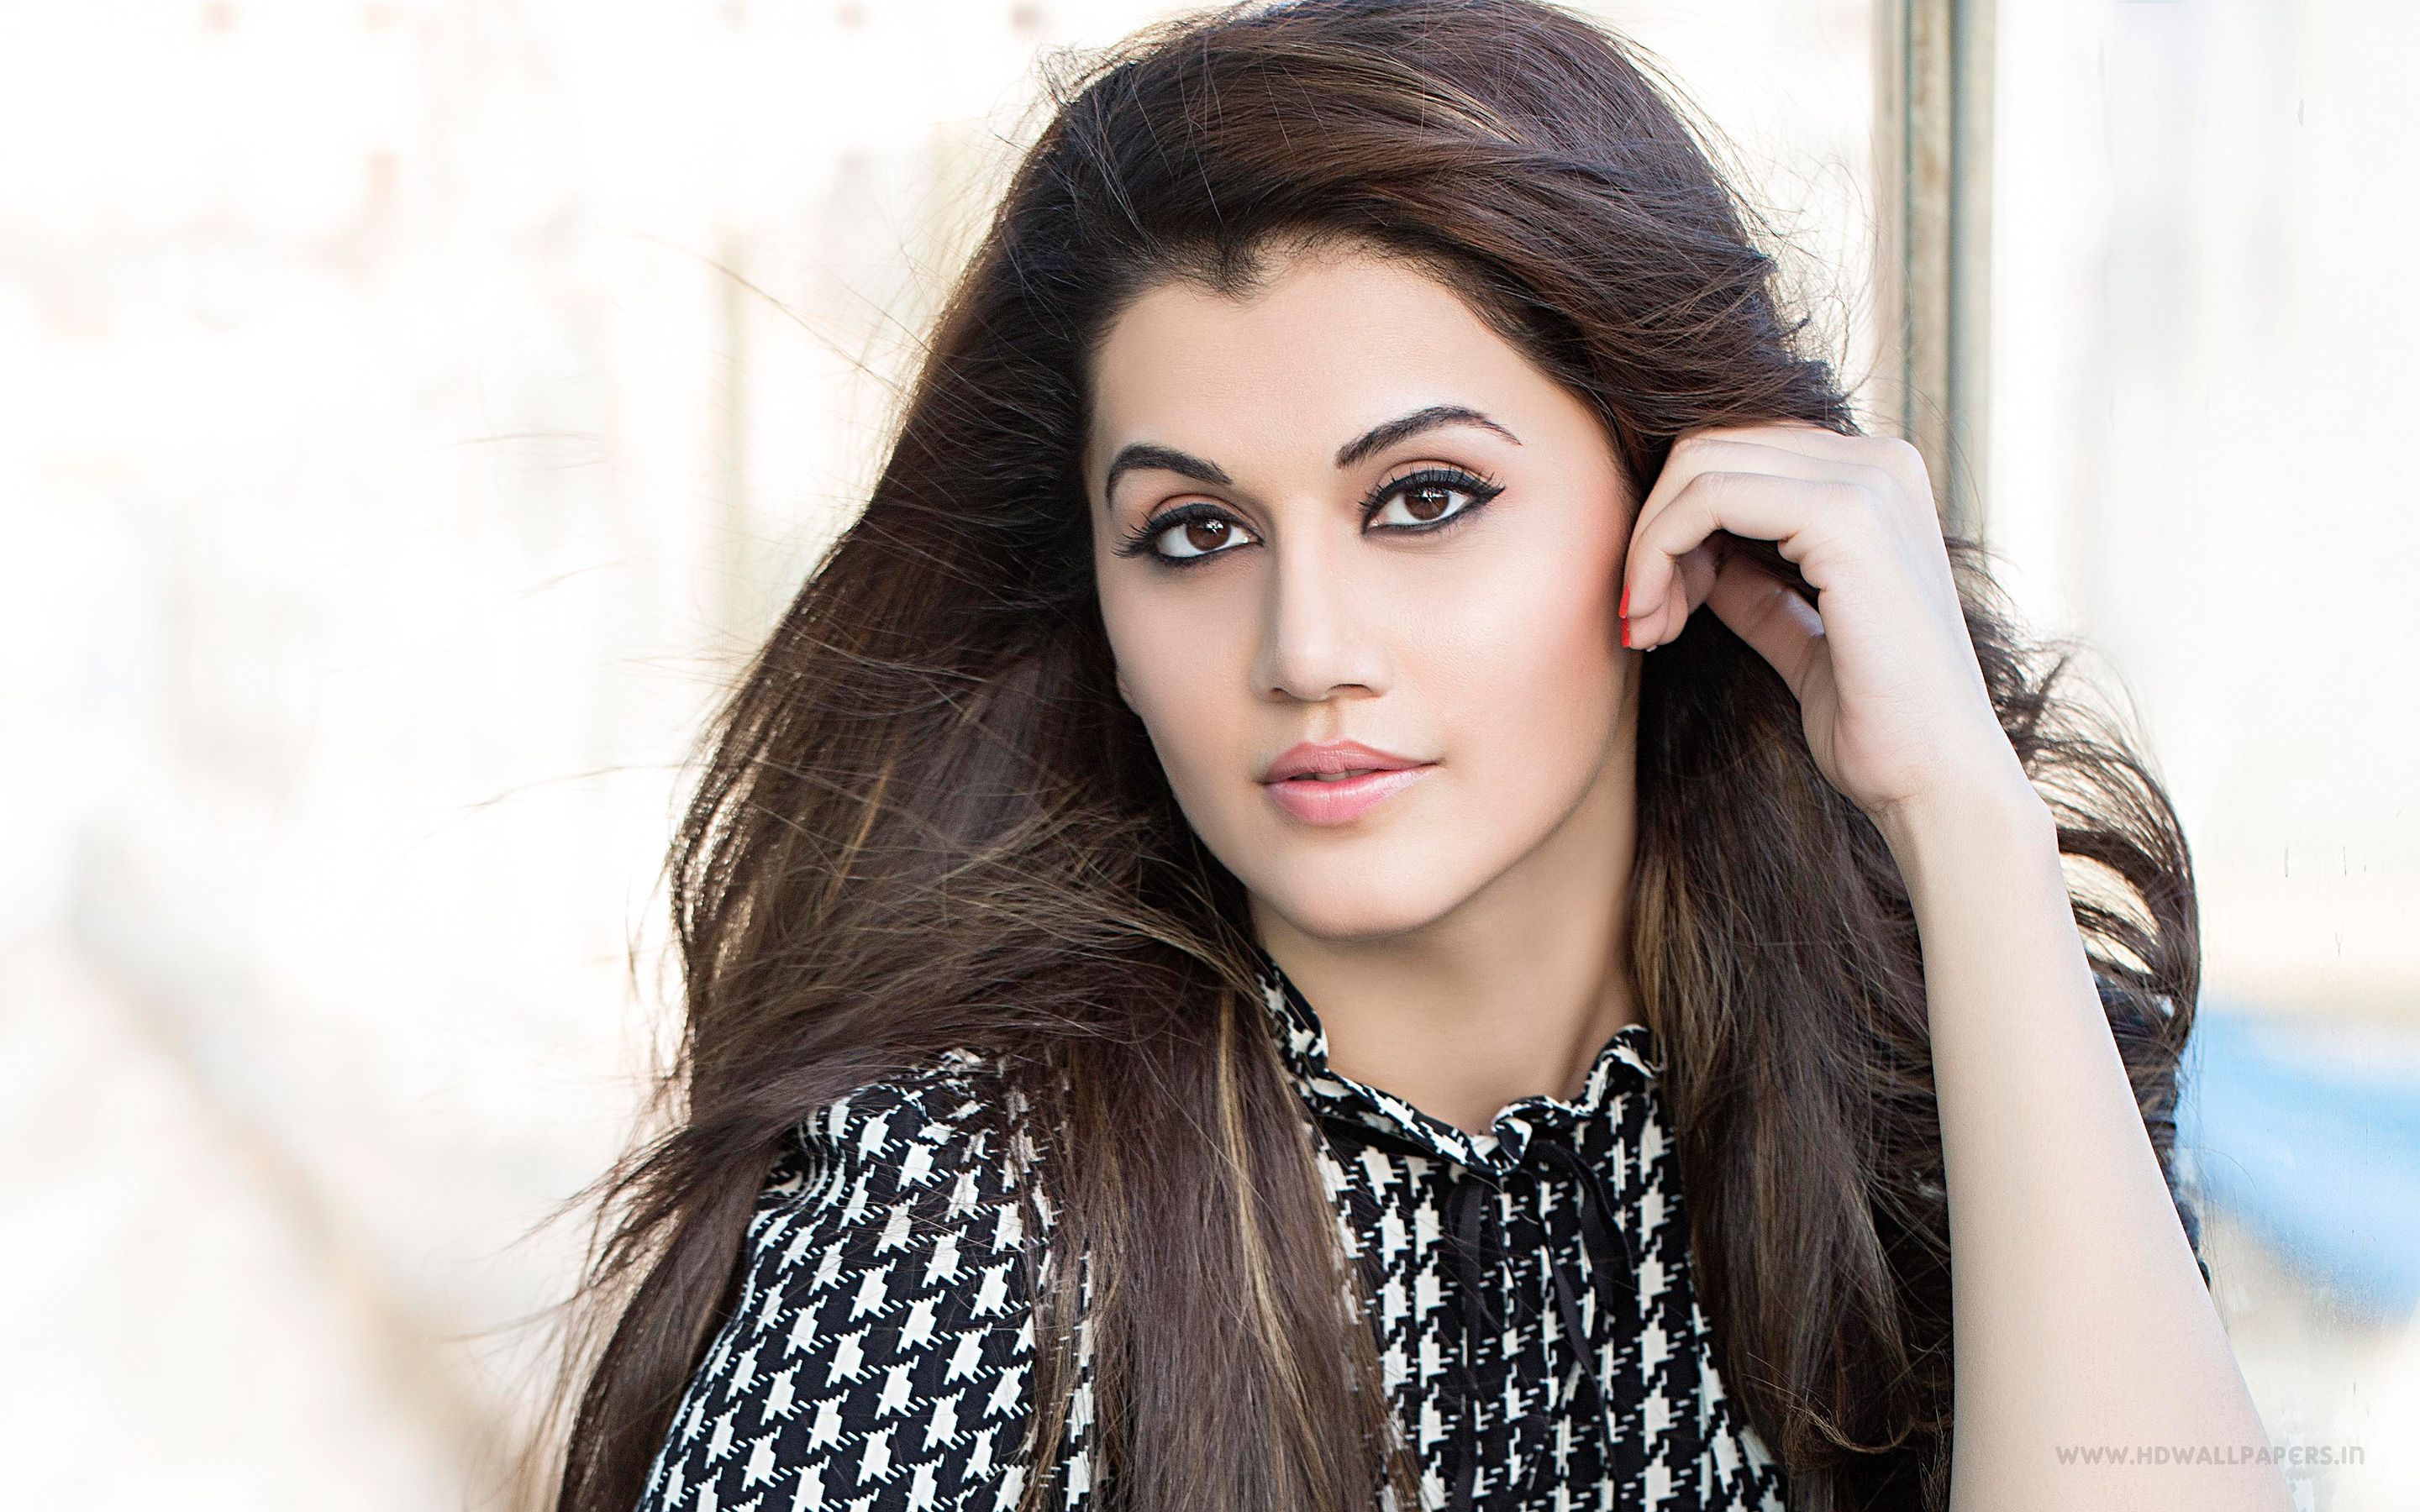 Which is Taapsee Pannu's movie?